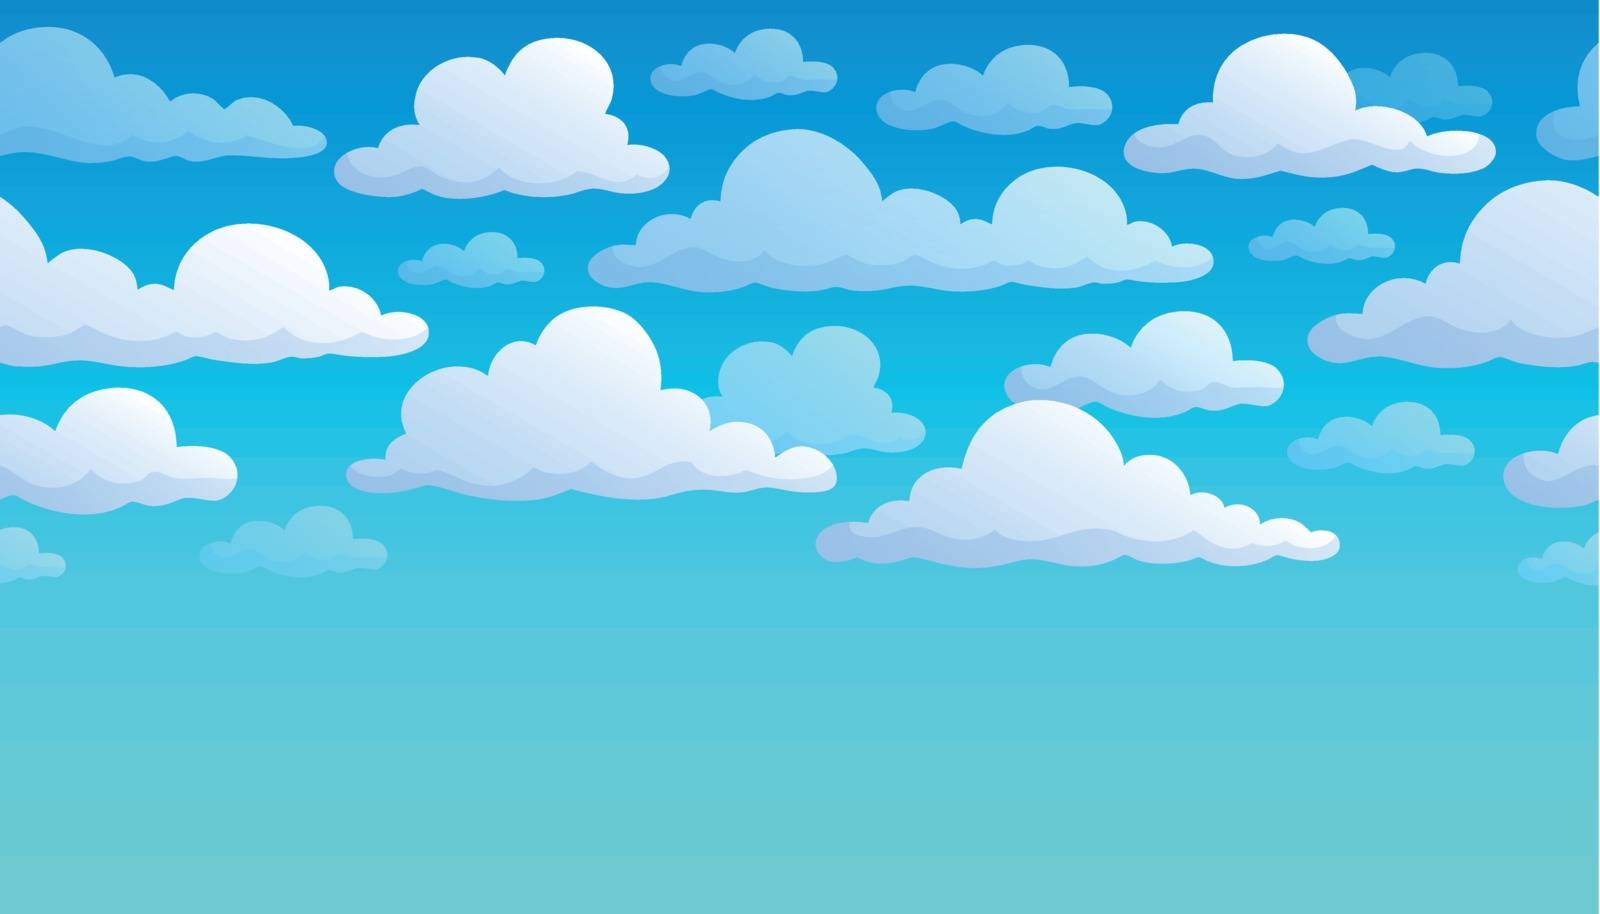 Cloudy sky background 7 by clairev